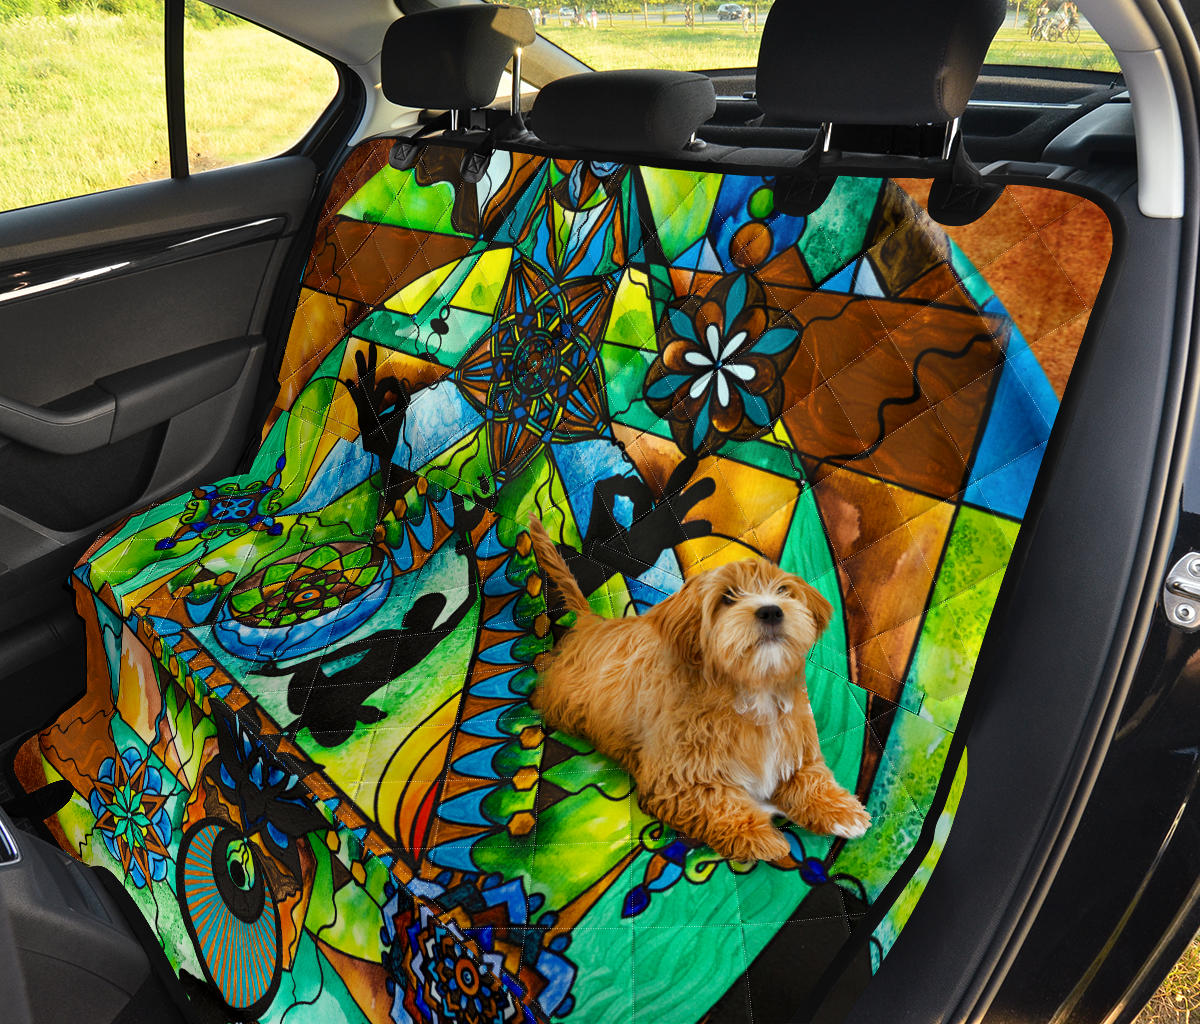 we-offer-the-lowest-prices-on-stability-aid-pet-seat-cover-sale_1.jpg